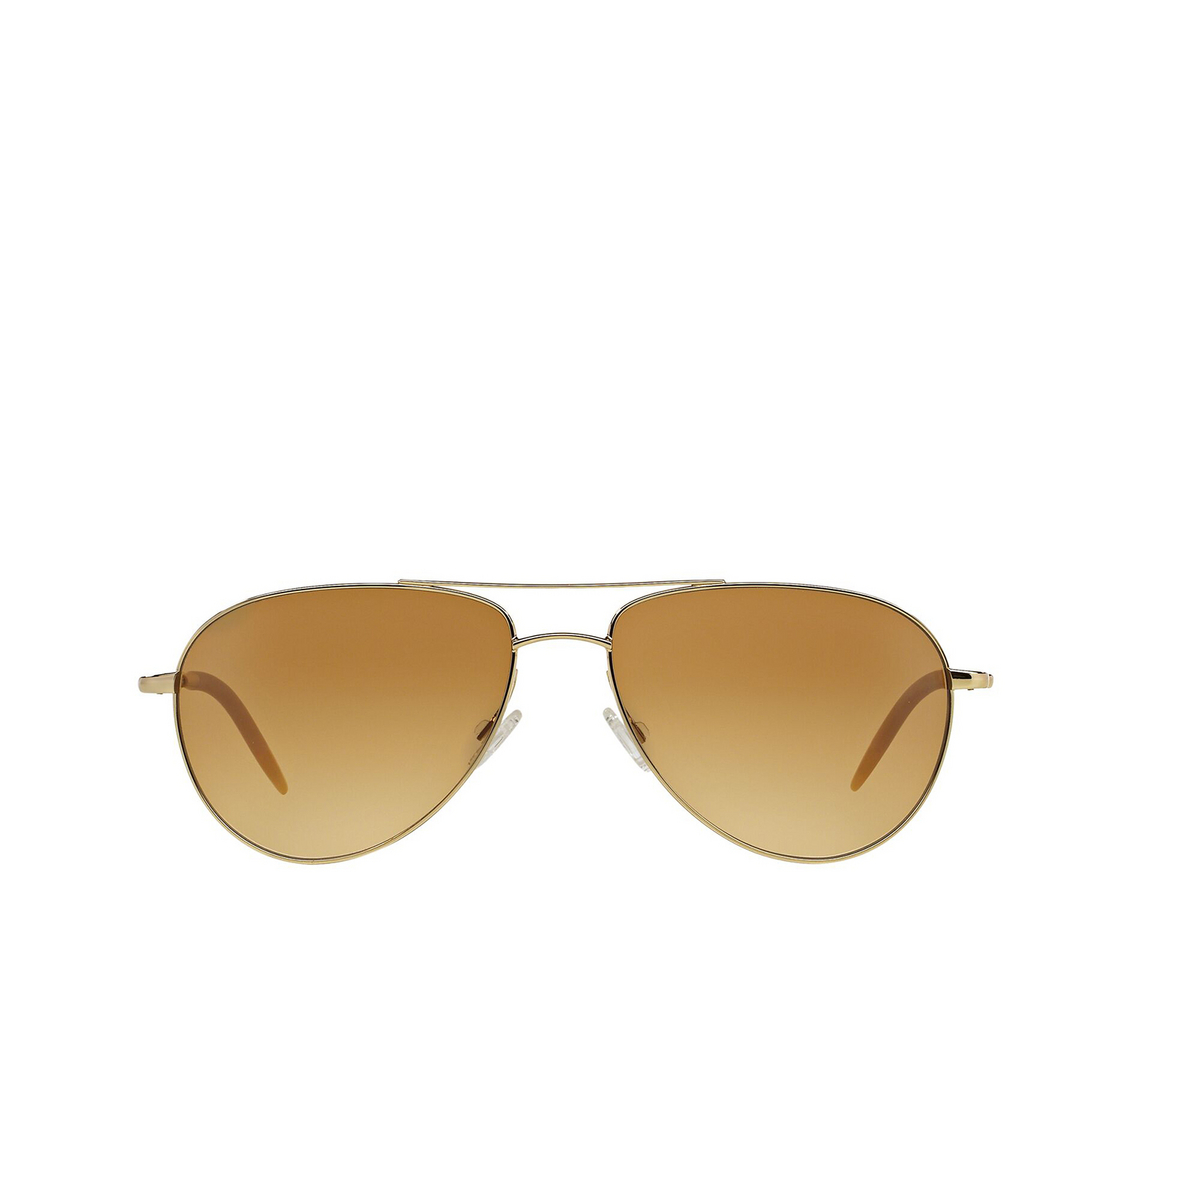 Oliver Peoples® Aviator Sunglasses: Benedict OV1002S color Gold 524251 - front view.